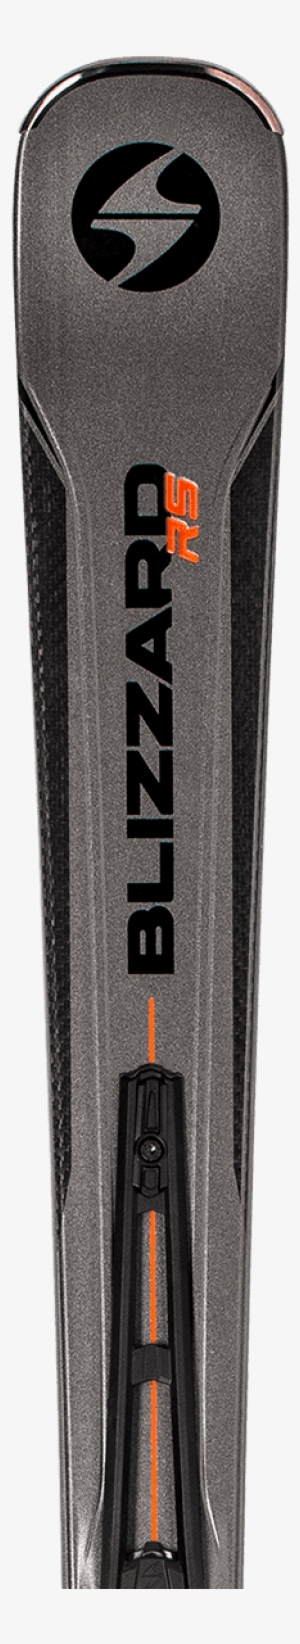 Blizzard Quattro Is A Collection Of Men's Skis Specifically - Blizzard Rtx Power 160 Tp 10 Demo 2016-2017